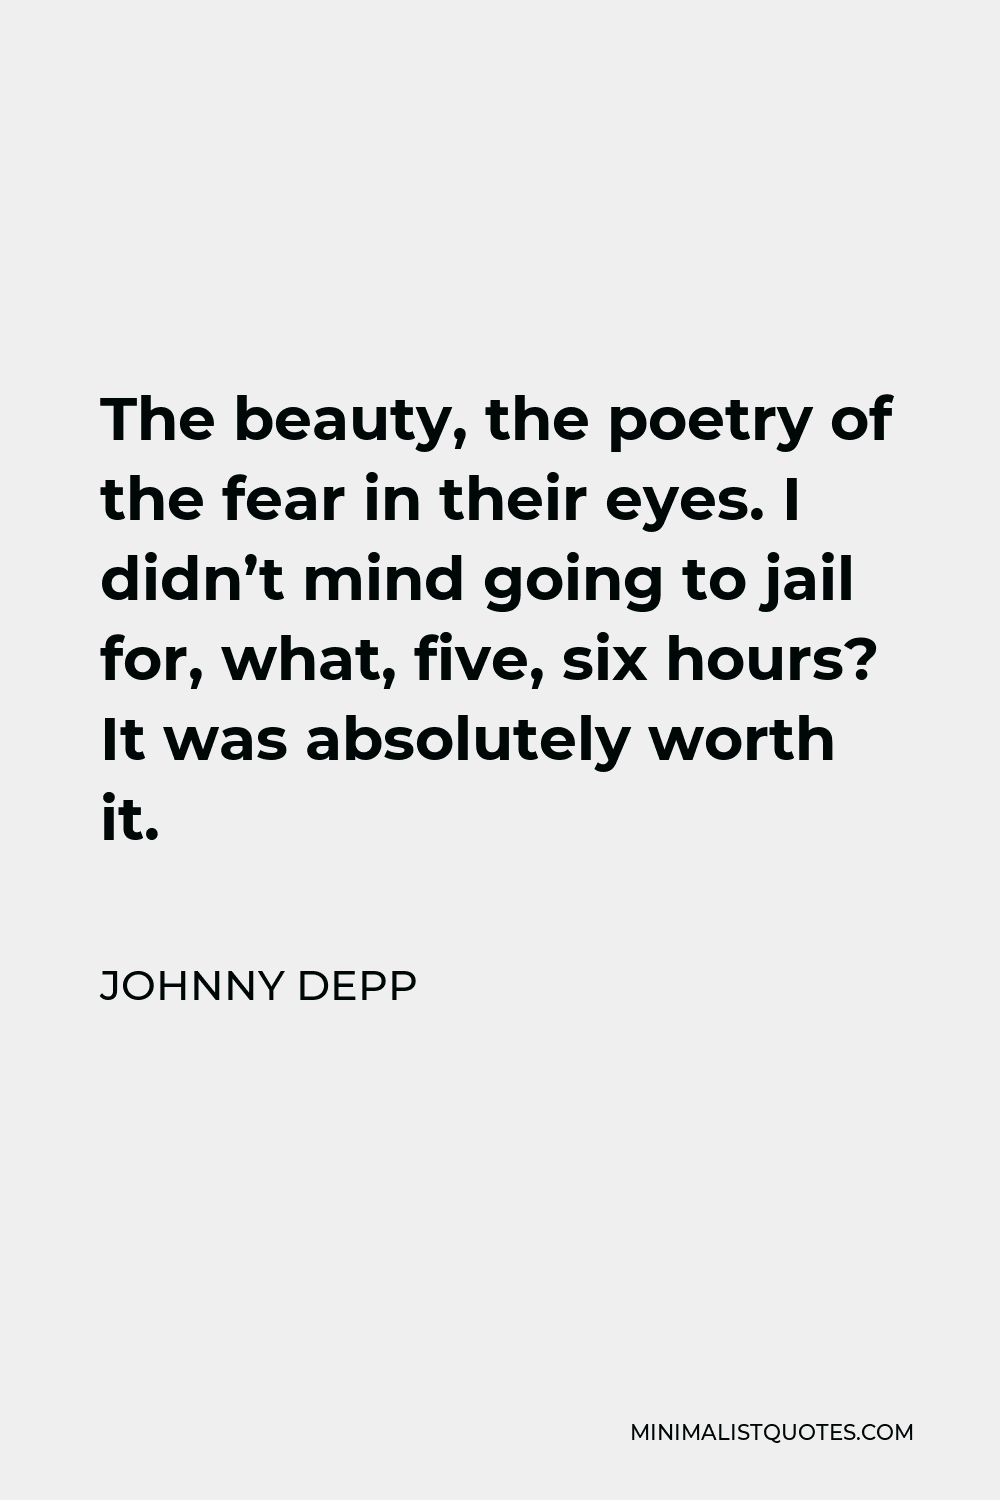 Johnny Depp Quote - The beauty, the poetry of the fear in their eyes. I didn’t mind going to jail for, what, five, six hours? It was absolutely worth it.